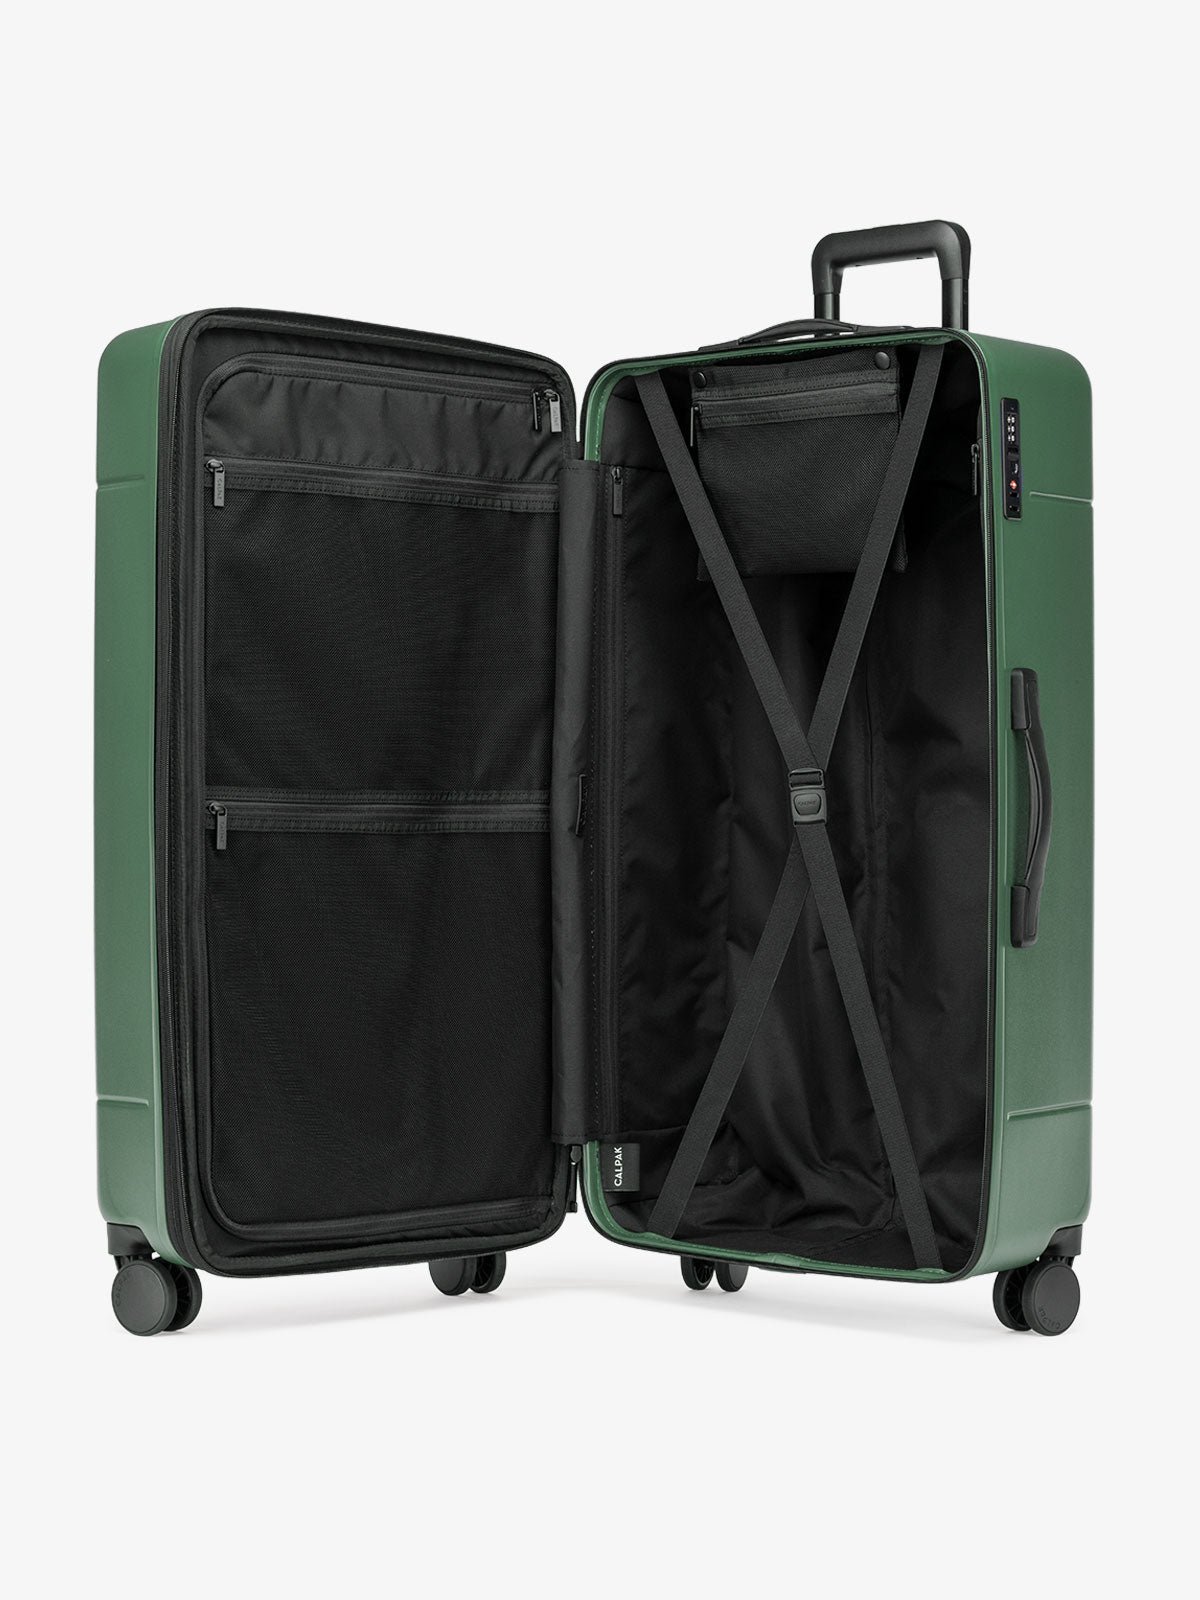 interior of hue polycarbonate trunk luggage in green emerald